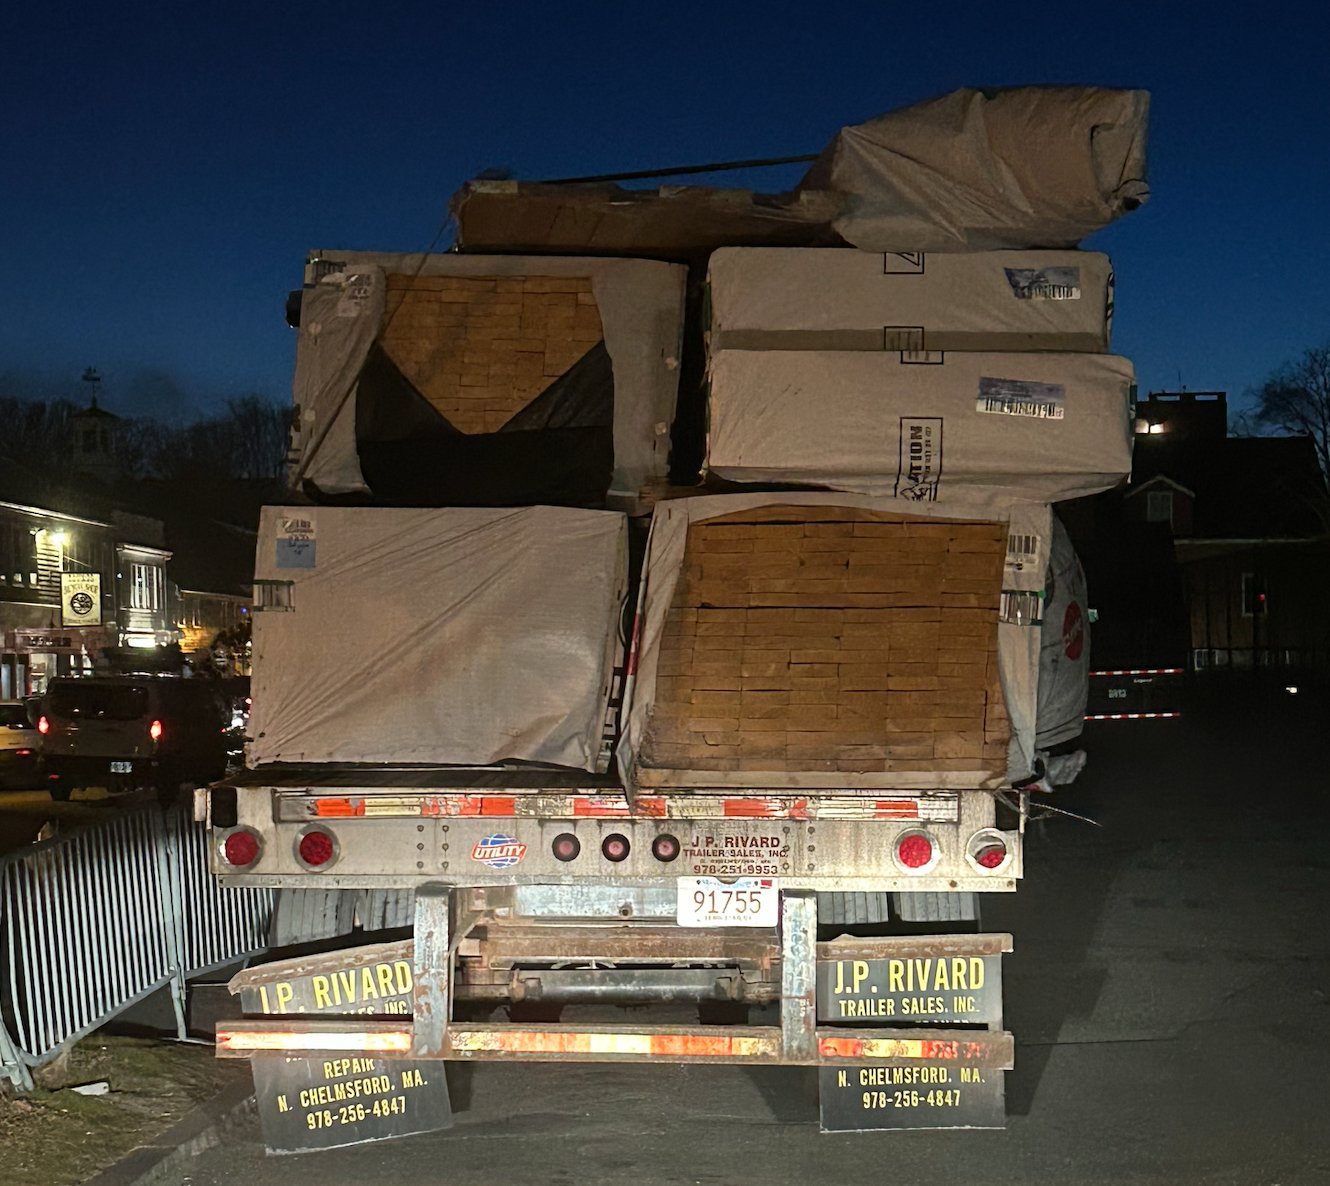 A load of building materials on this Marine Lumber truck shifted during Friday's rocky boat ride from Hyannis to Nantucket, but nothing broke loose.